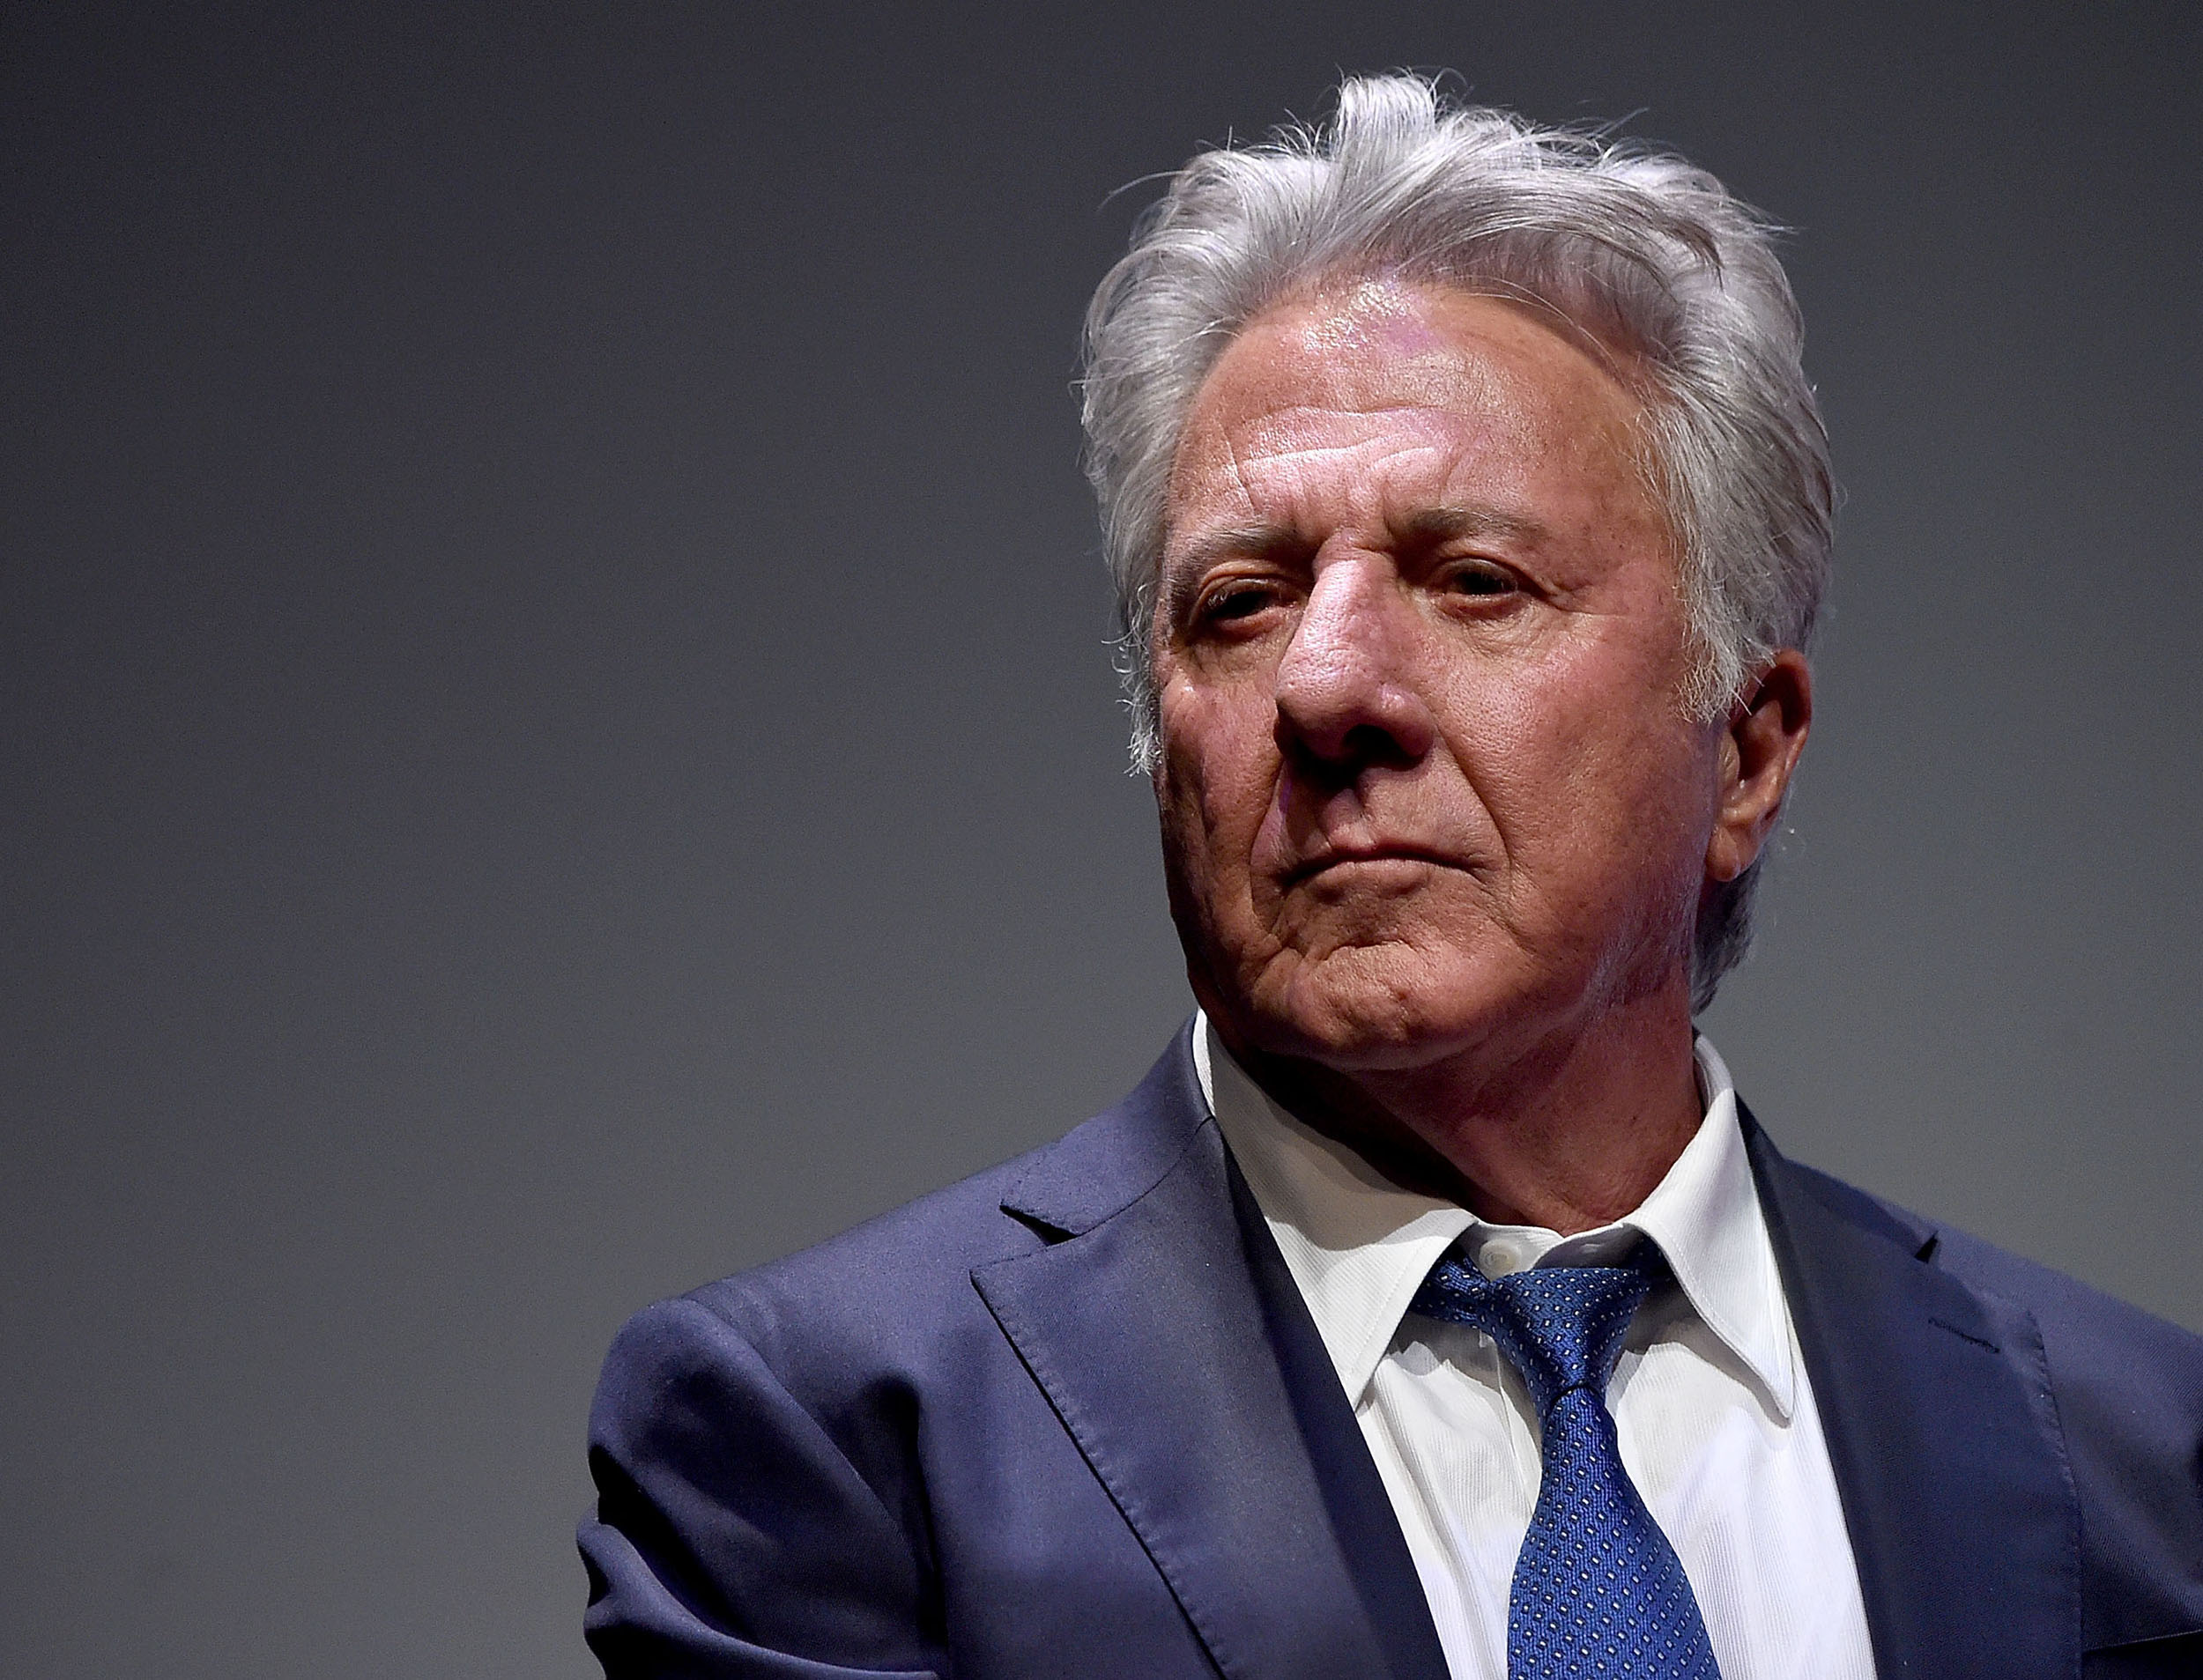 Dustin Hoffman exposed himself when I was 16, says playwright Cori ...